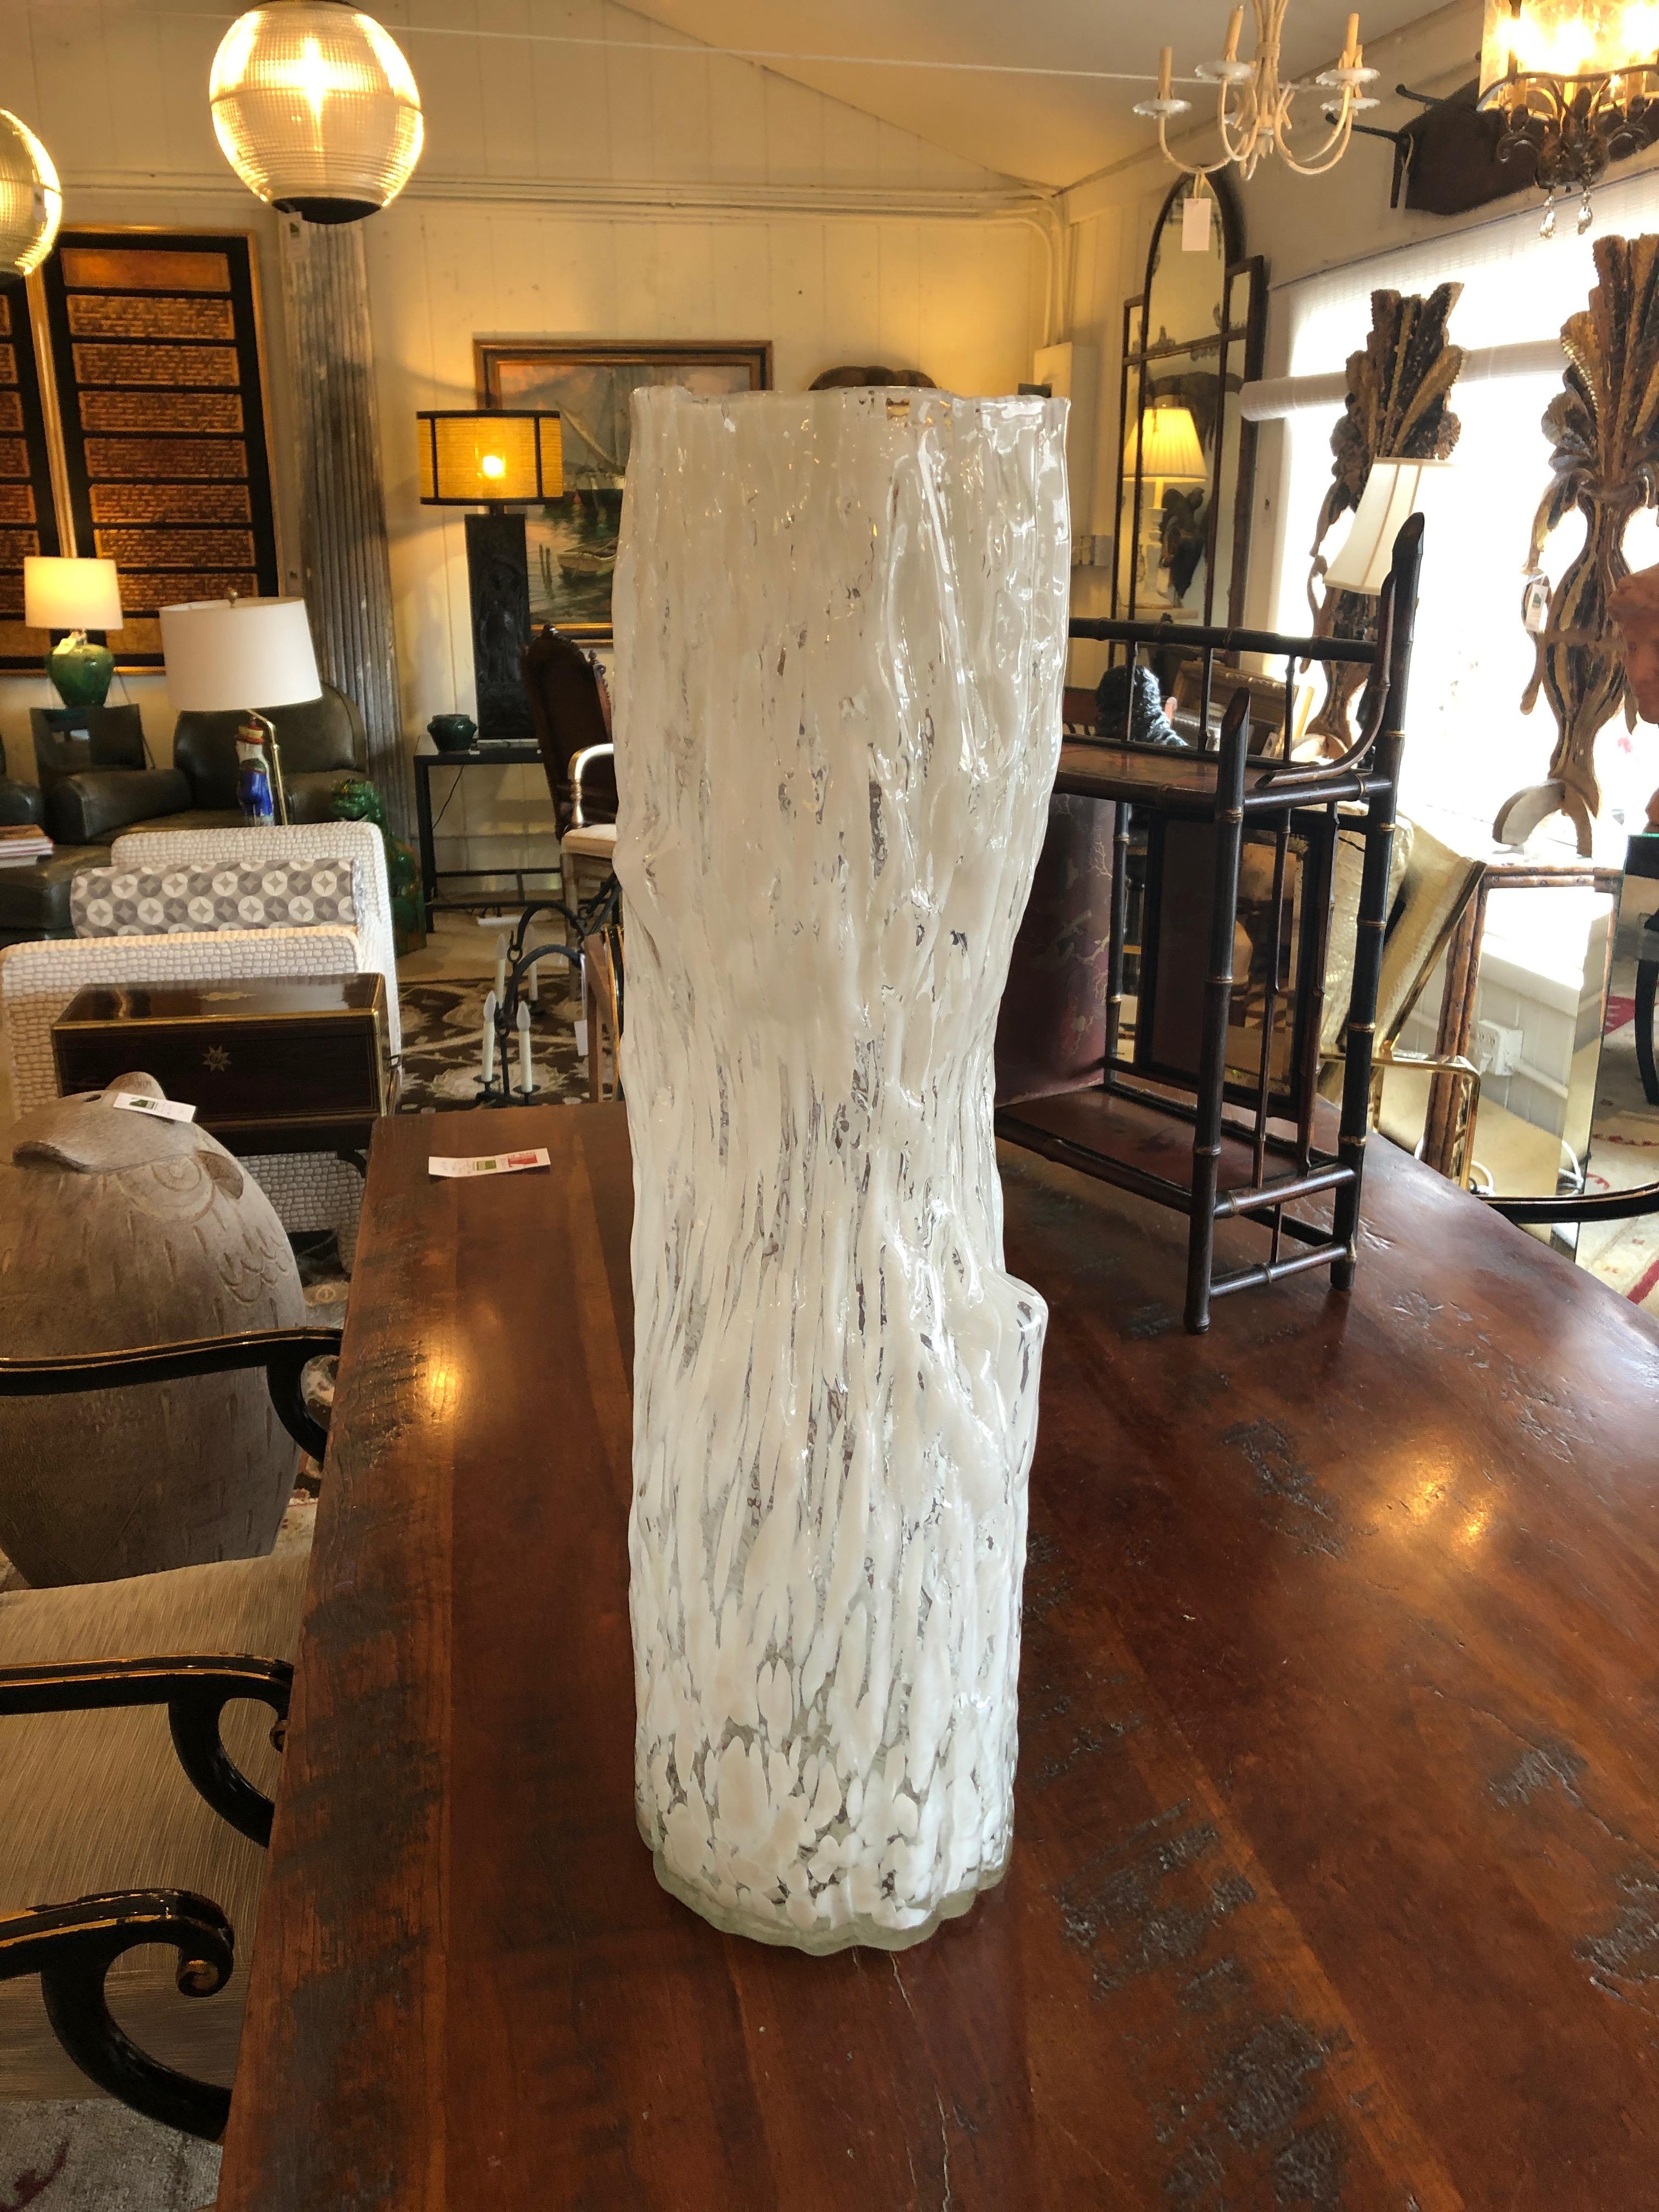 A striking very tall elongated irregularly shaped Murano vase in glamorous shimmering clear and white glass having a faux bois shape. Functional vase but sculptural art as well.